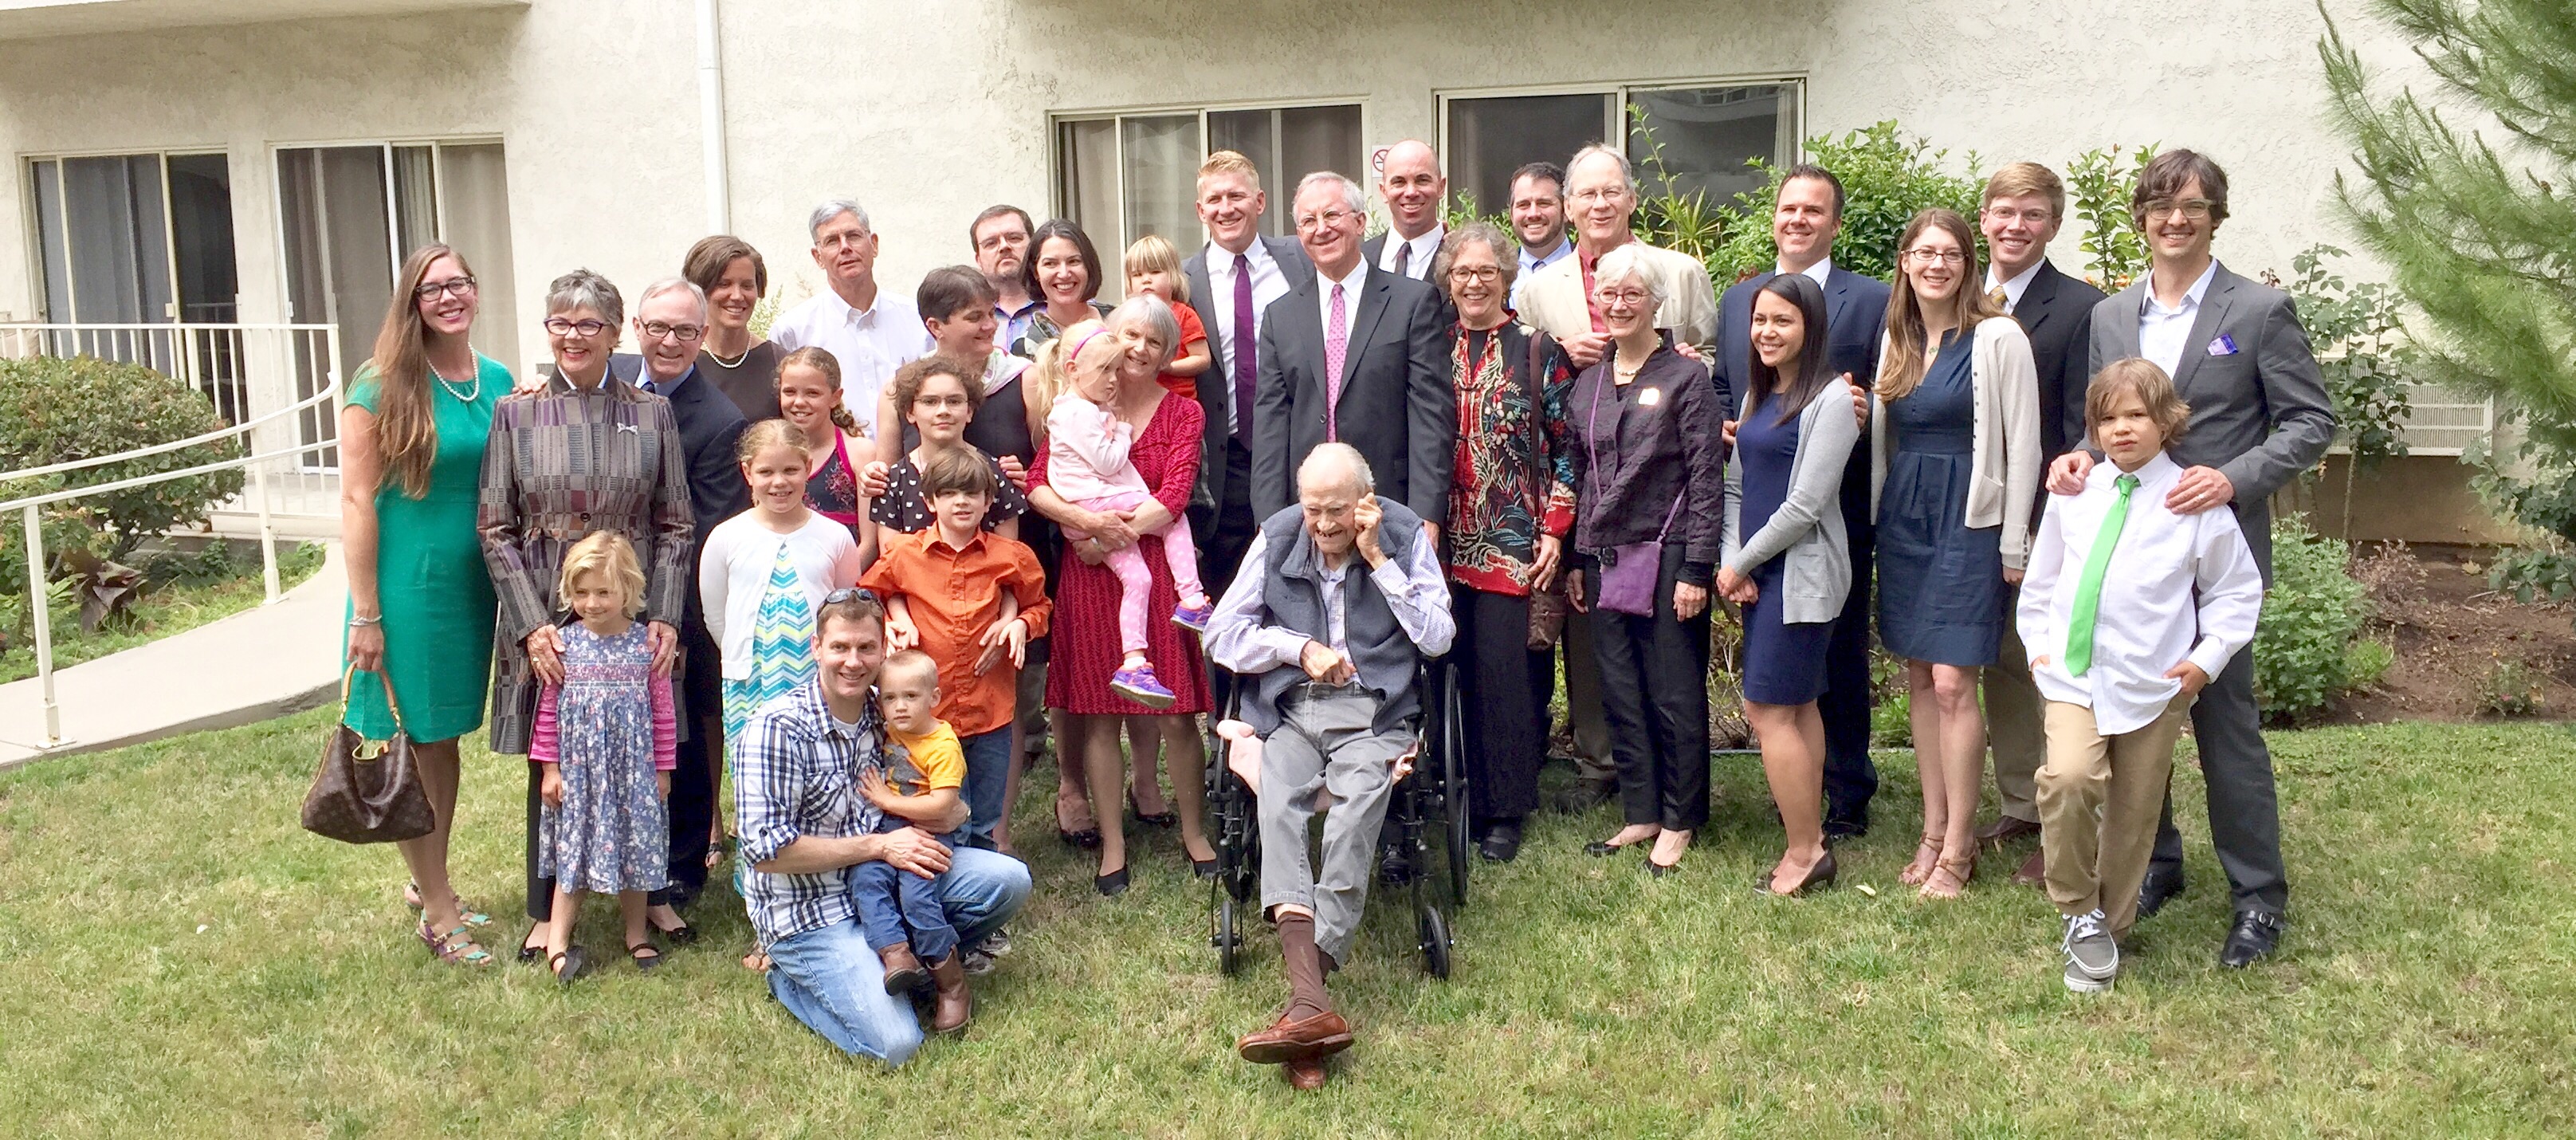 As many Palmers as possible gathered to celebrate Dida's 100th Birthday on Sunday